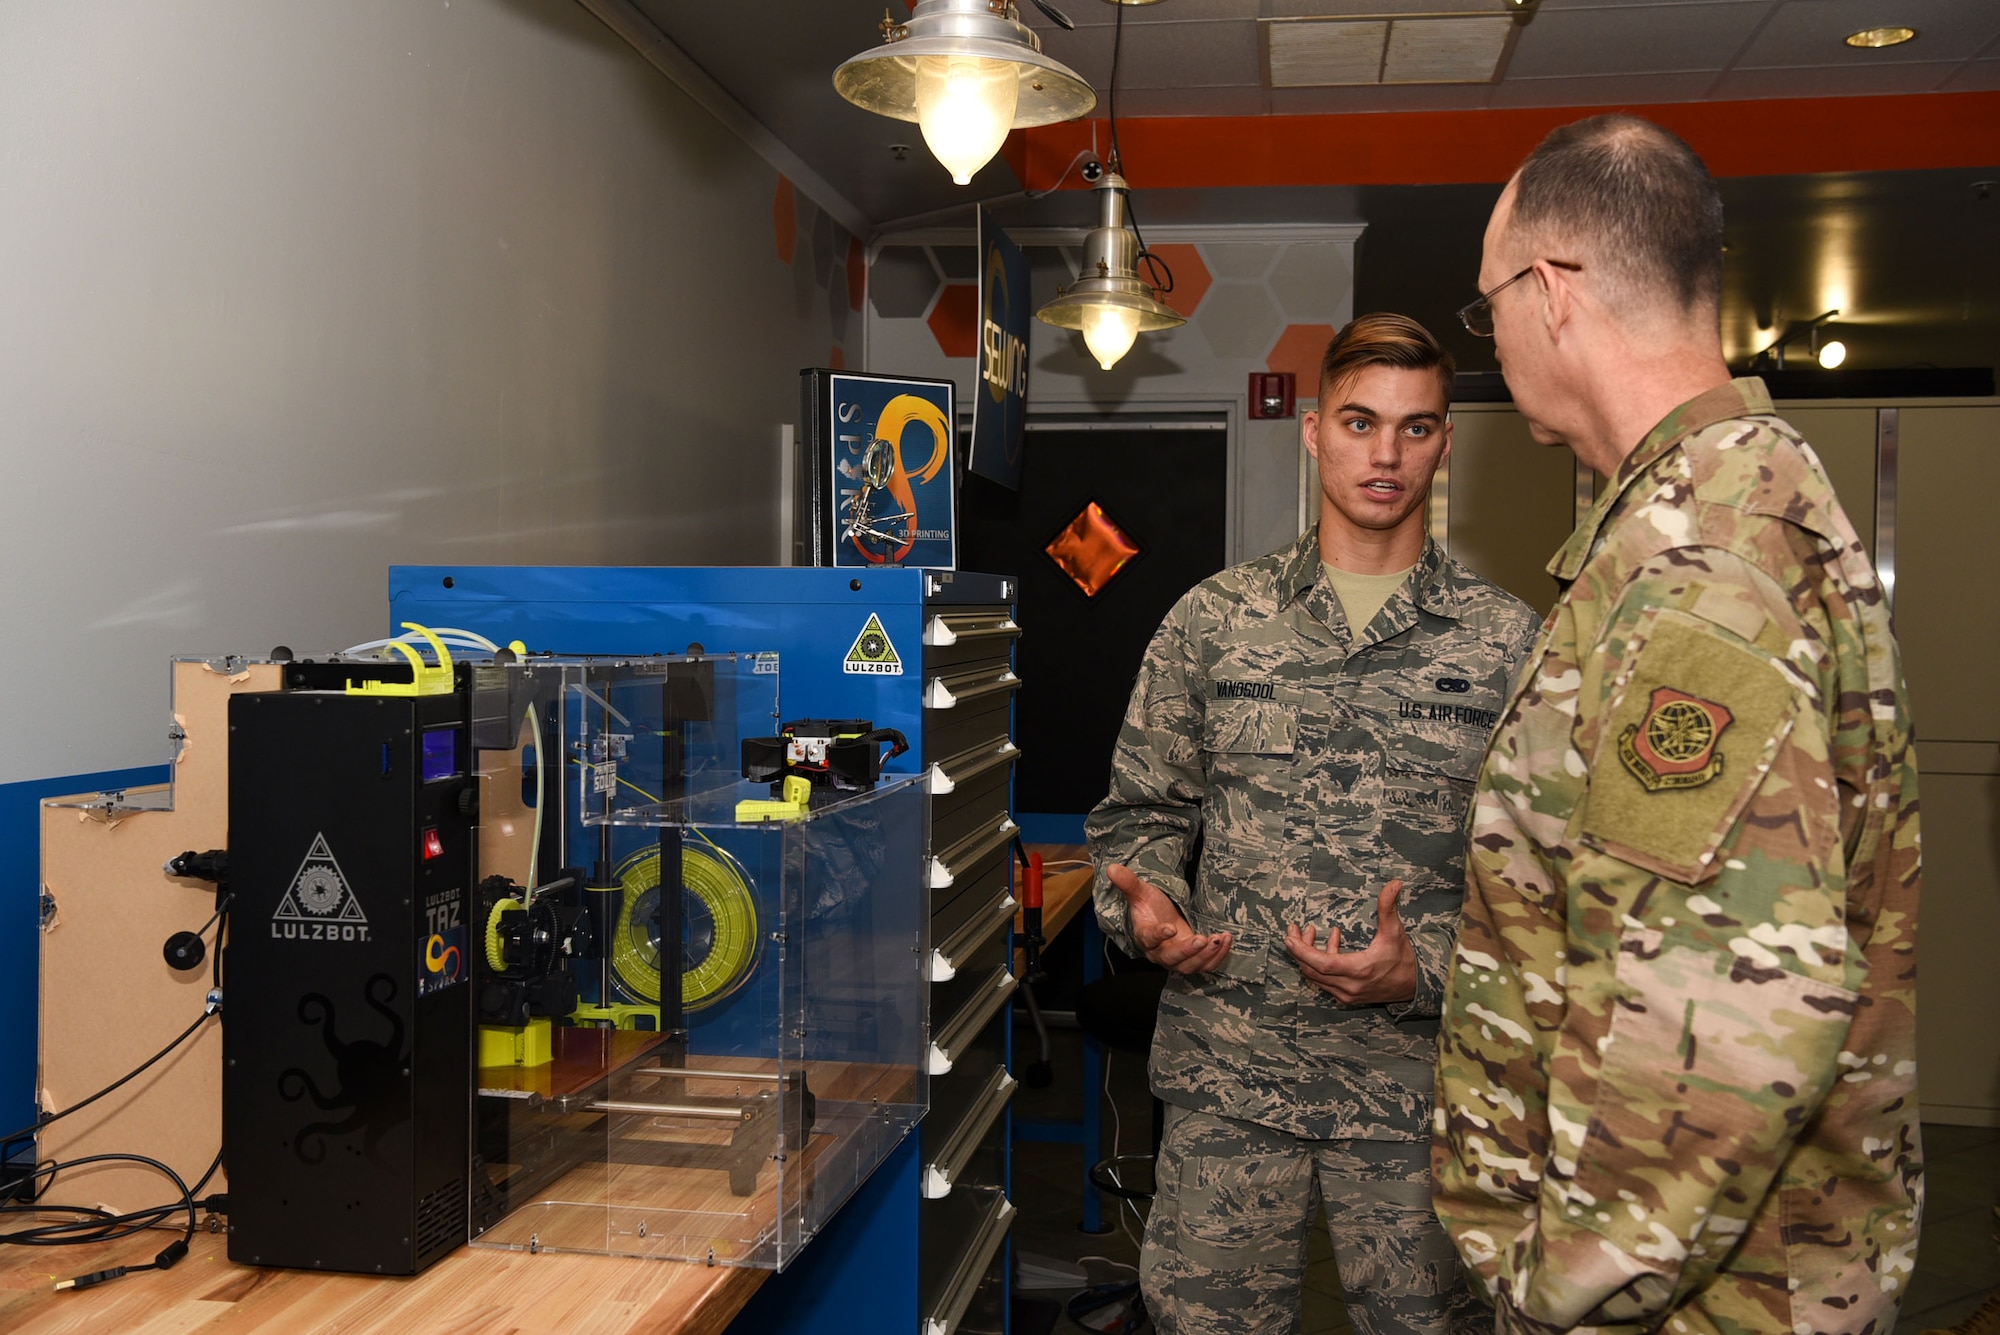 Airman 1st Class Evan Vanosdol, 305th Maintenance Squadron crew chief, showcases the Innovation Lab 3D printers to Brig. Gen. Richard W. Gibbs, Air Mobility Command, Logistics, Engineering and Force Protection director, at Joint Base McGuire-Dix-Lakehurst, N.J., Oct. 31, 2019. Vanosdol is currently interning at the Innovation Lab where he highlighted how Airmen from the 305th Air Mobility Wing have already implemented 3D printed equipment, proving to save thousands of dollars. (U.S. Air Force photo by Airman 1st Class Ariel Owings)